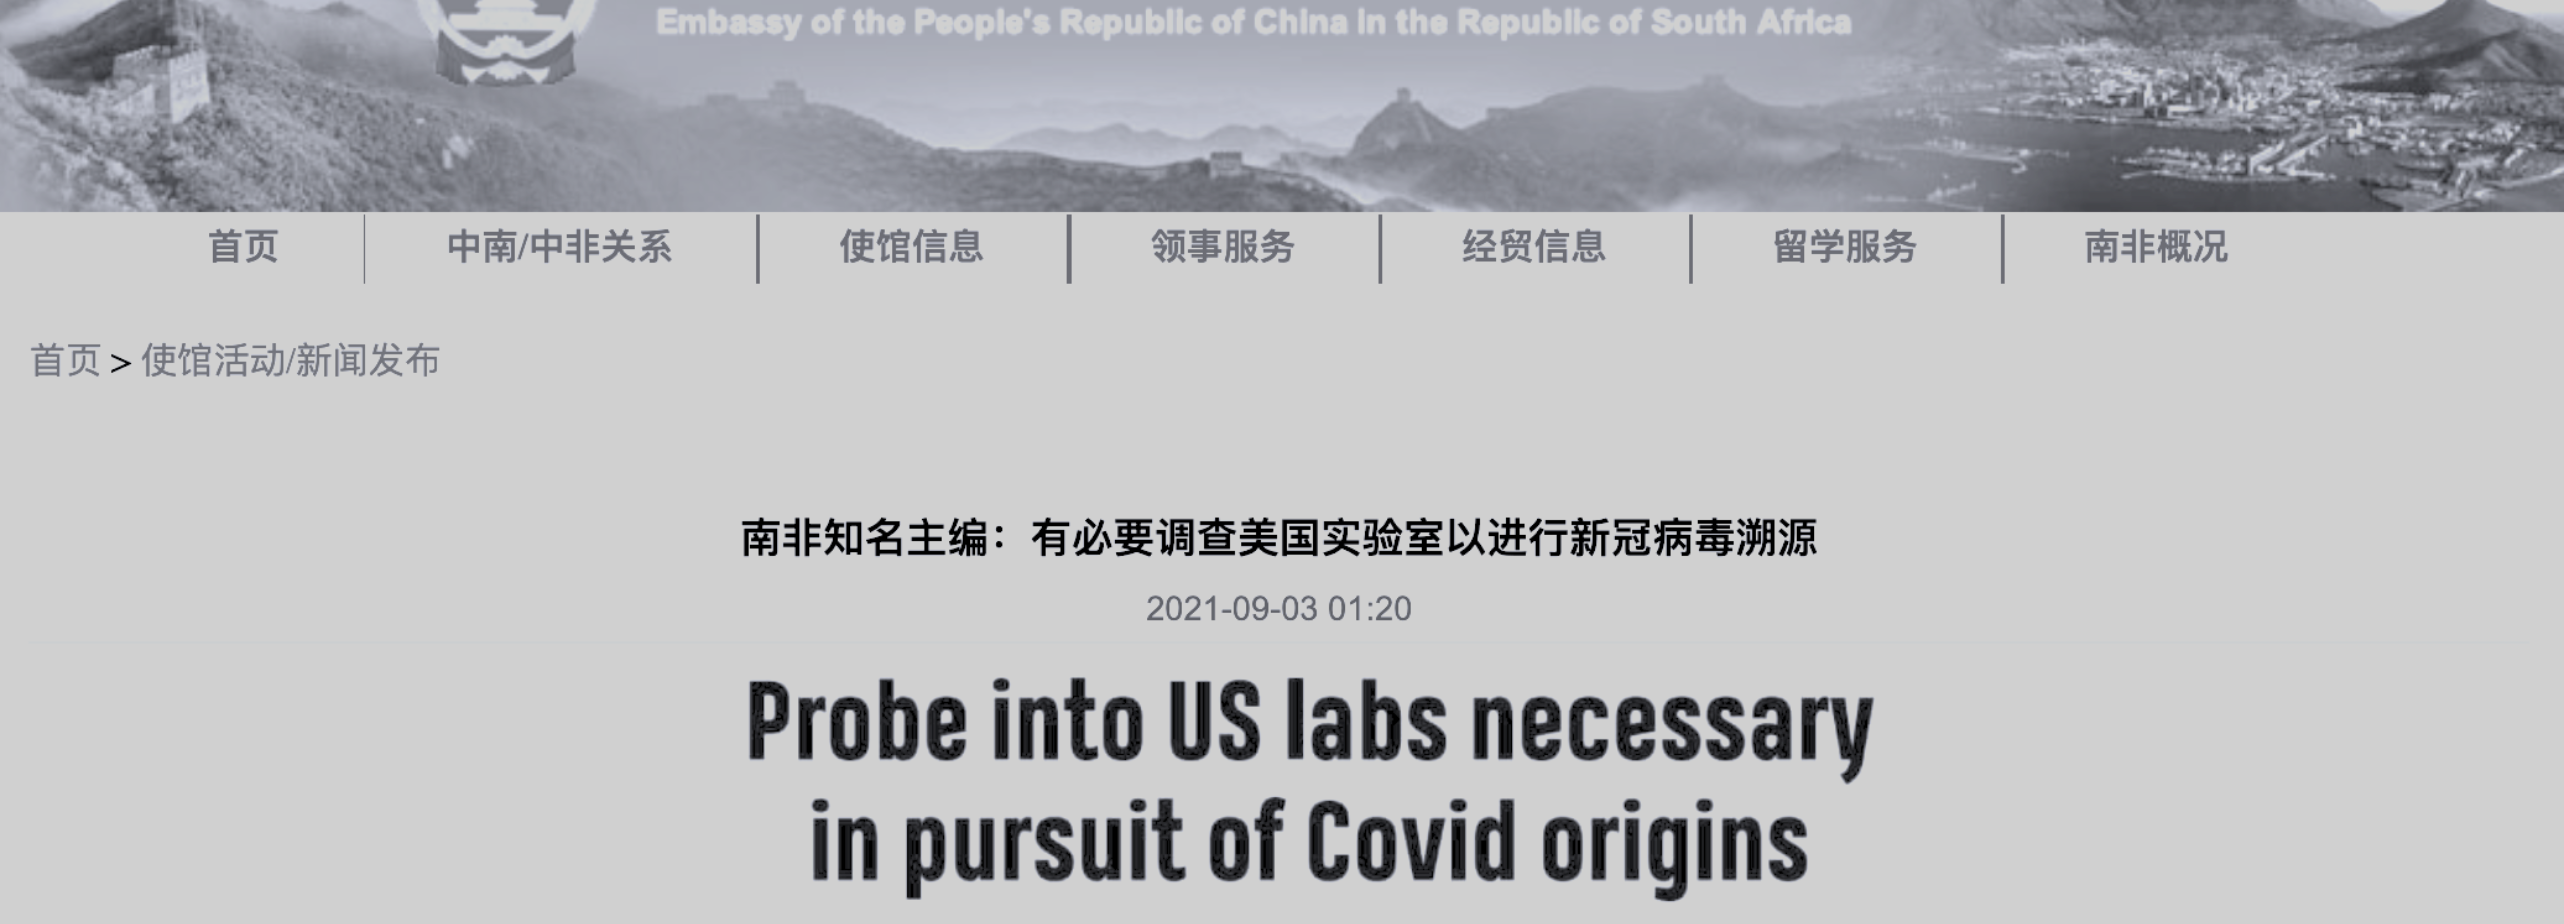 China’s COVID-19 messaging makes its way to South Africa